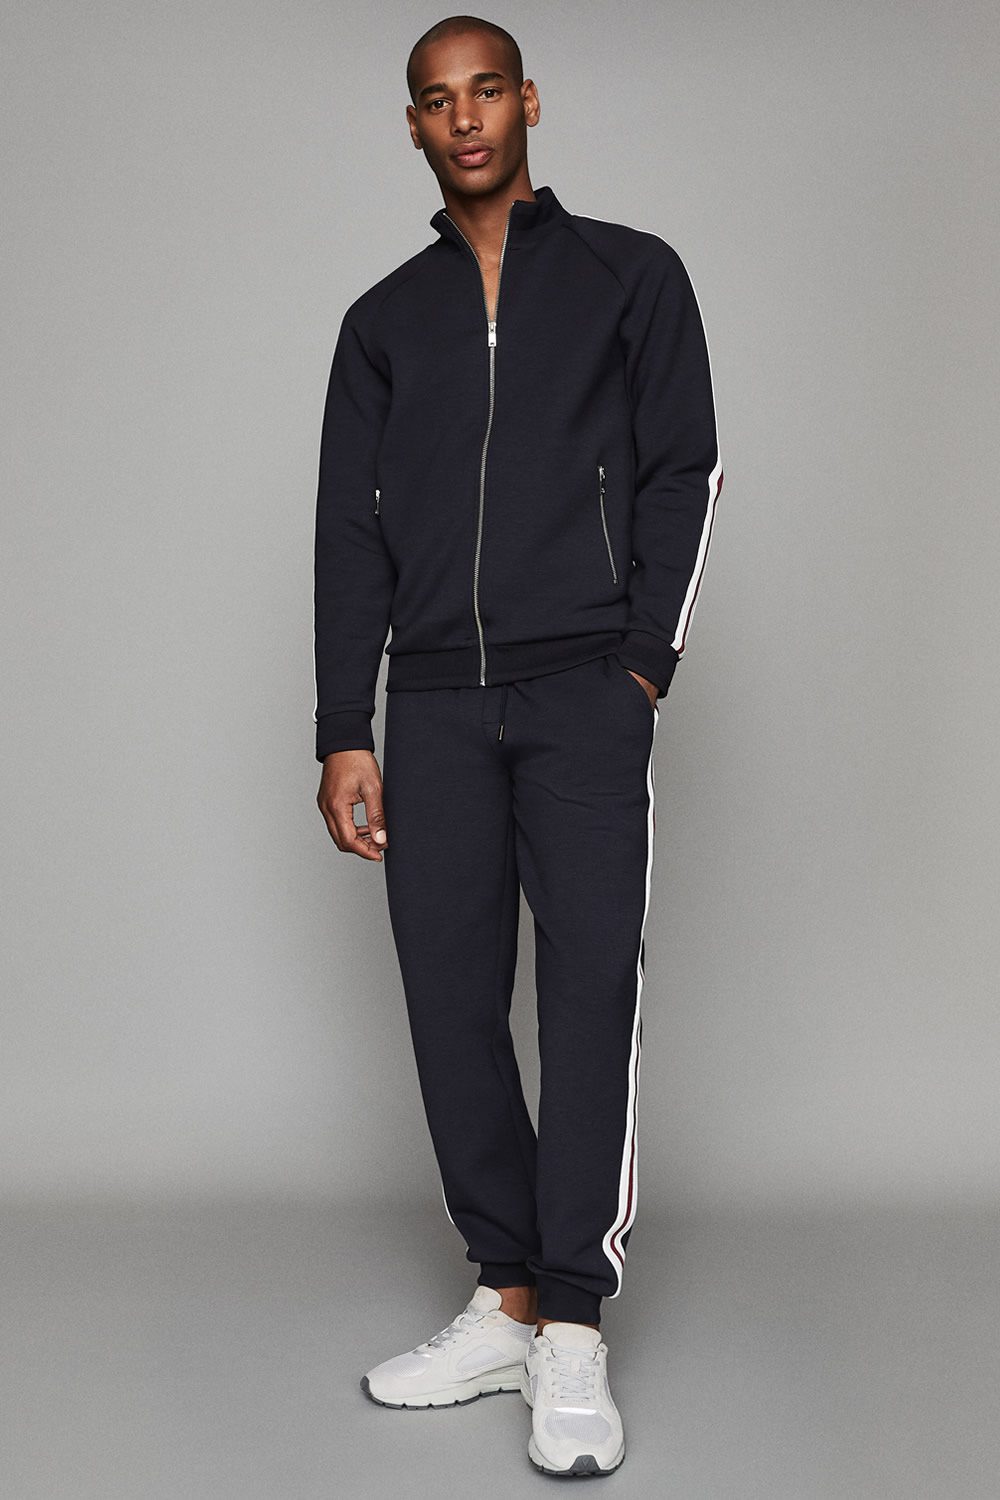 7 Ways to Sports Luxe Your Sweats  Sports luxe, Mens outfits, Man